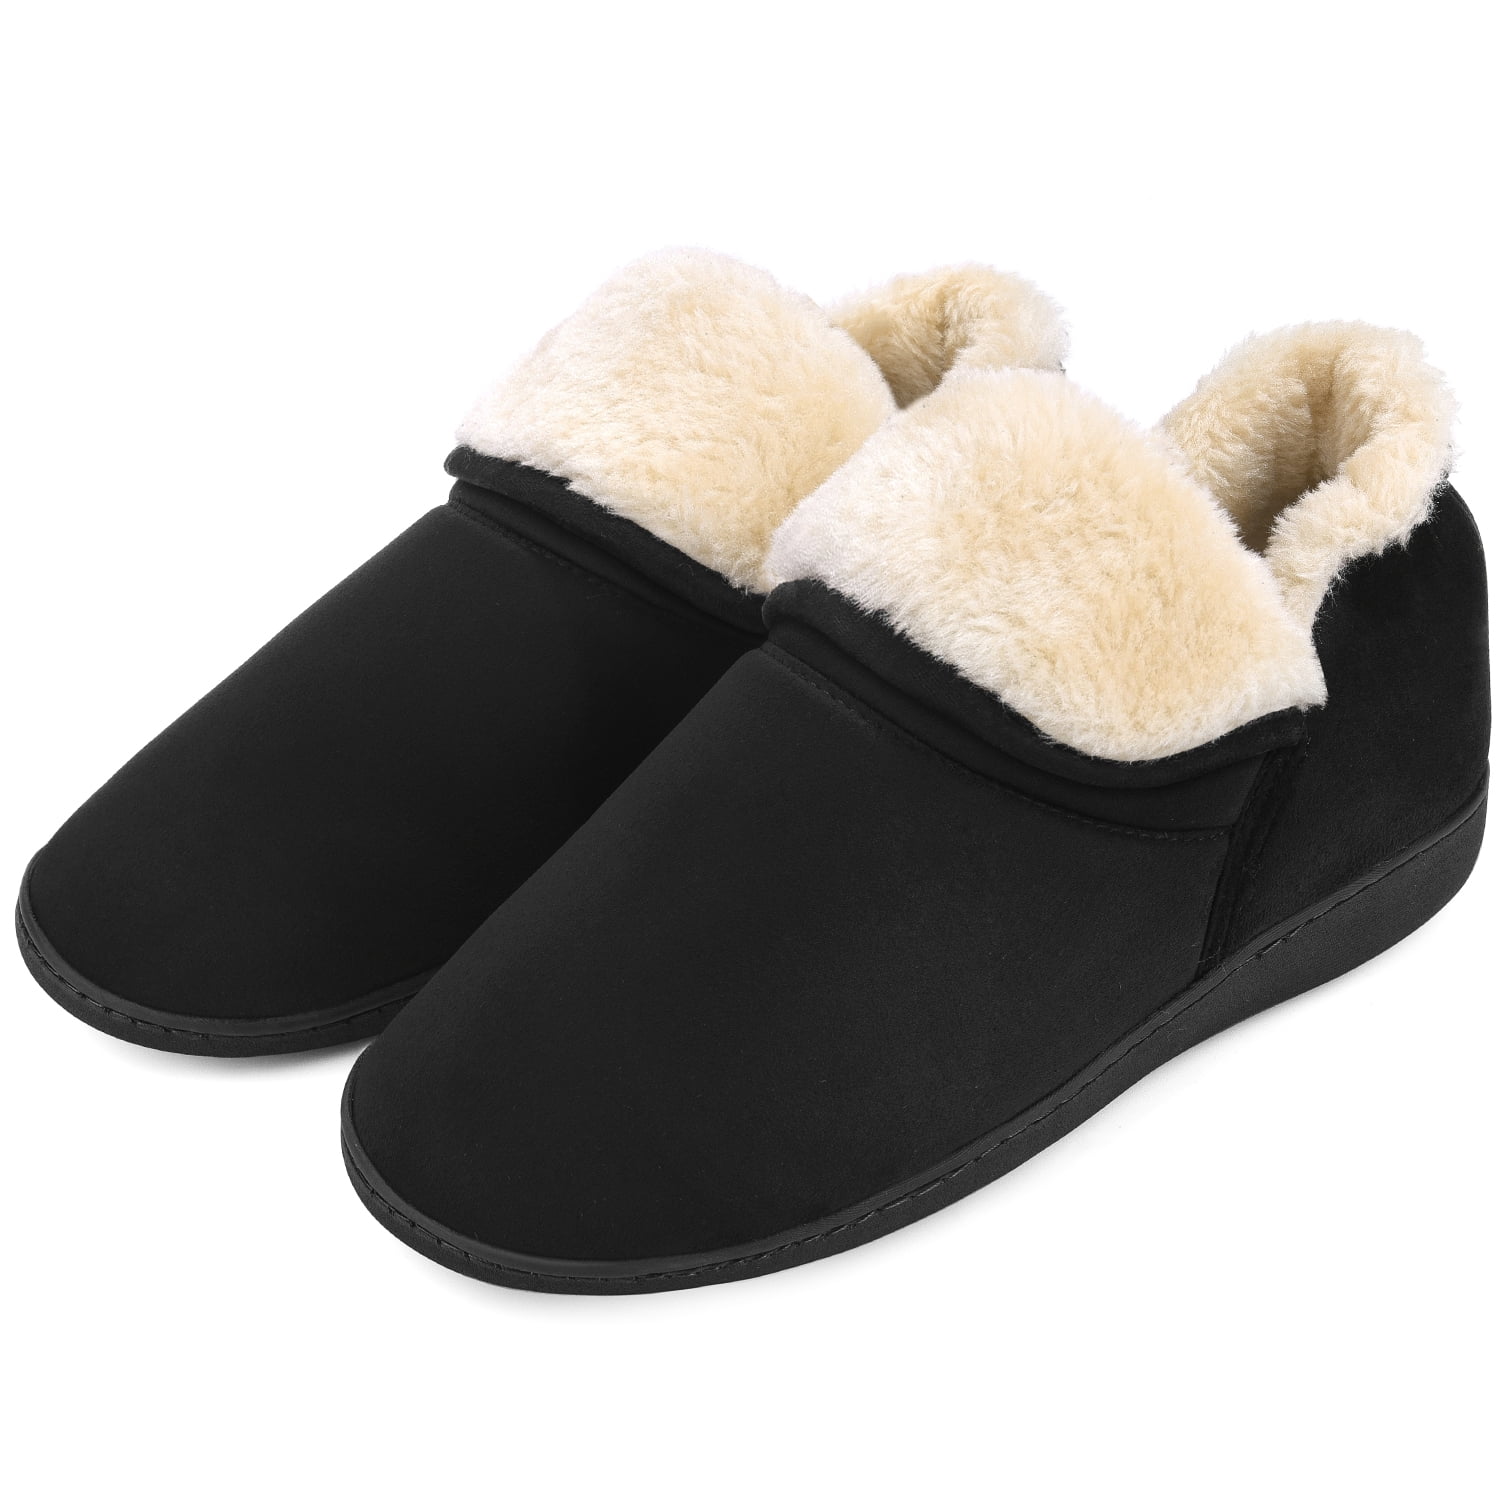 Black Women Faux Fur Suede Indoor Slippers With Bowknot Memory Foam Rubber Sole 